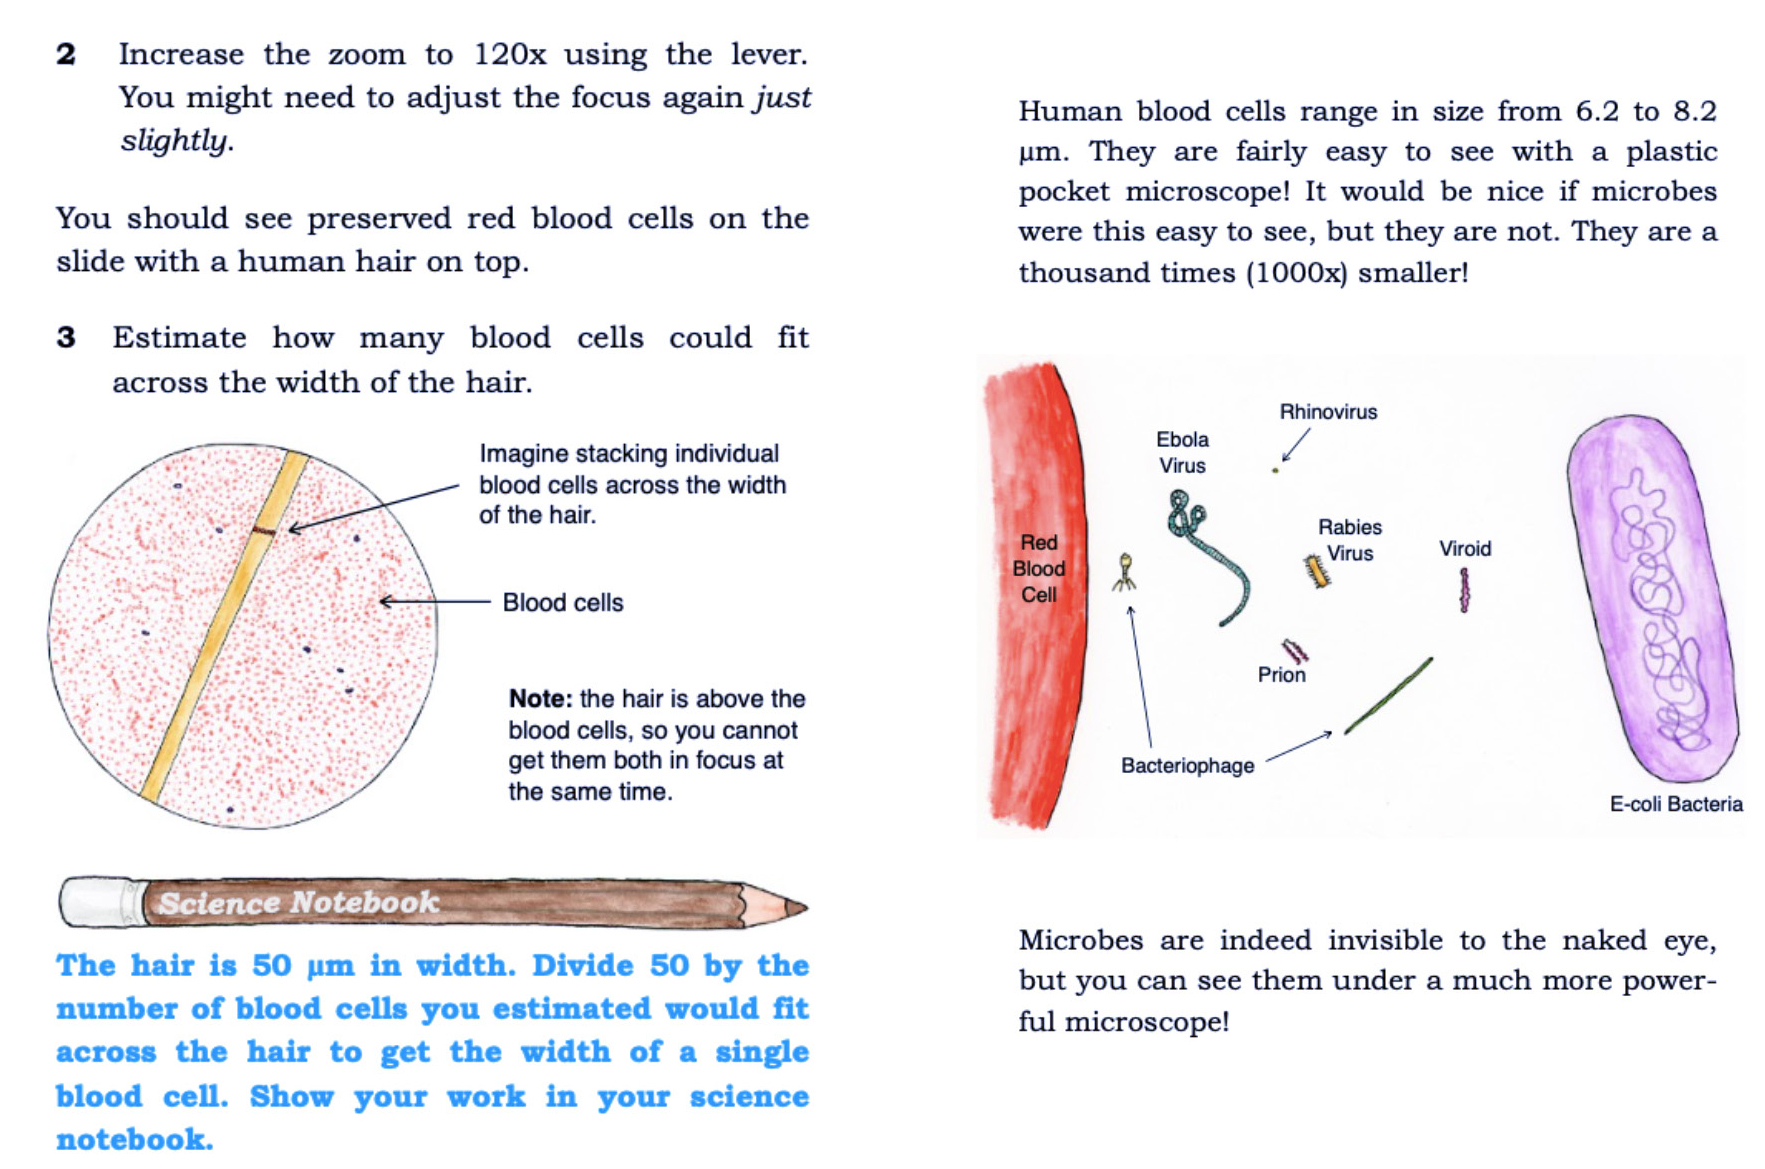 Samples from the Going Viral! booklet showing how students will compare a red blood cell to a hair, and then compare that red blood cell to even smaller microorganisms.